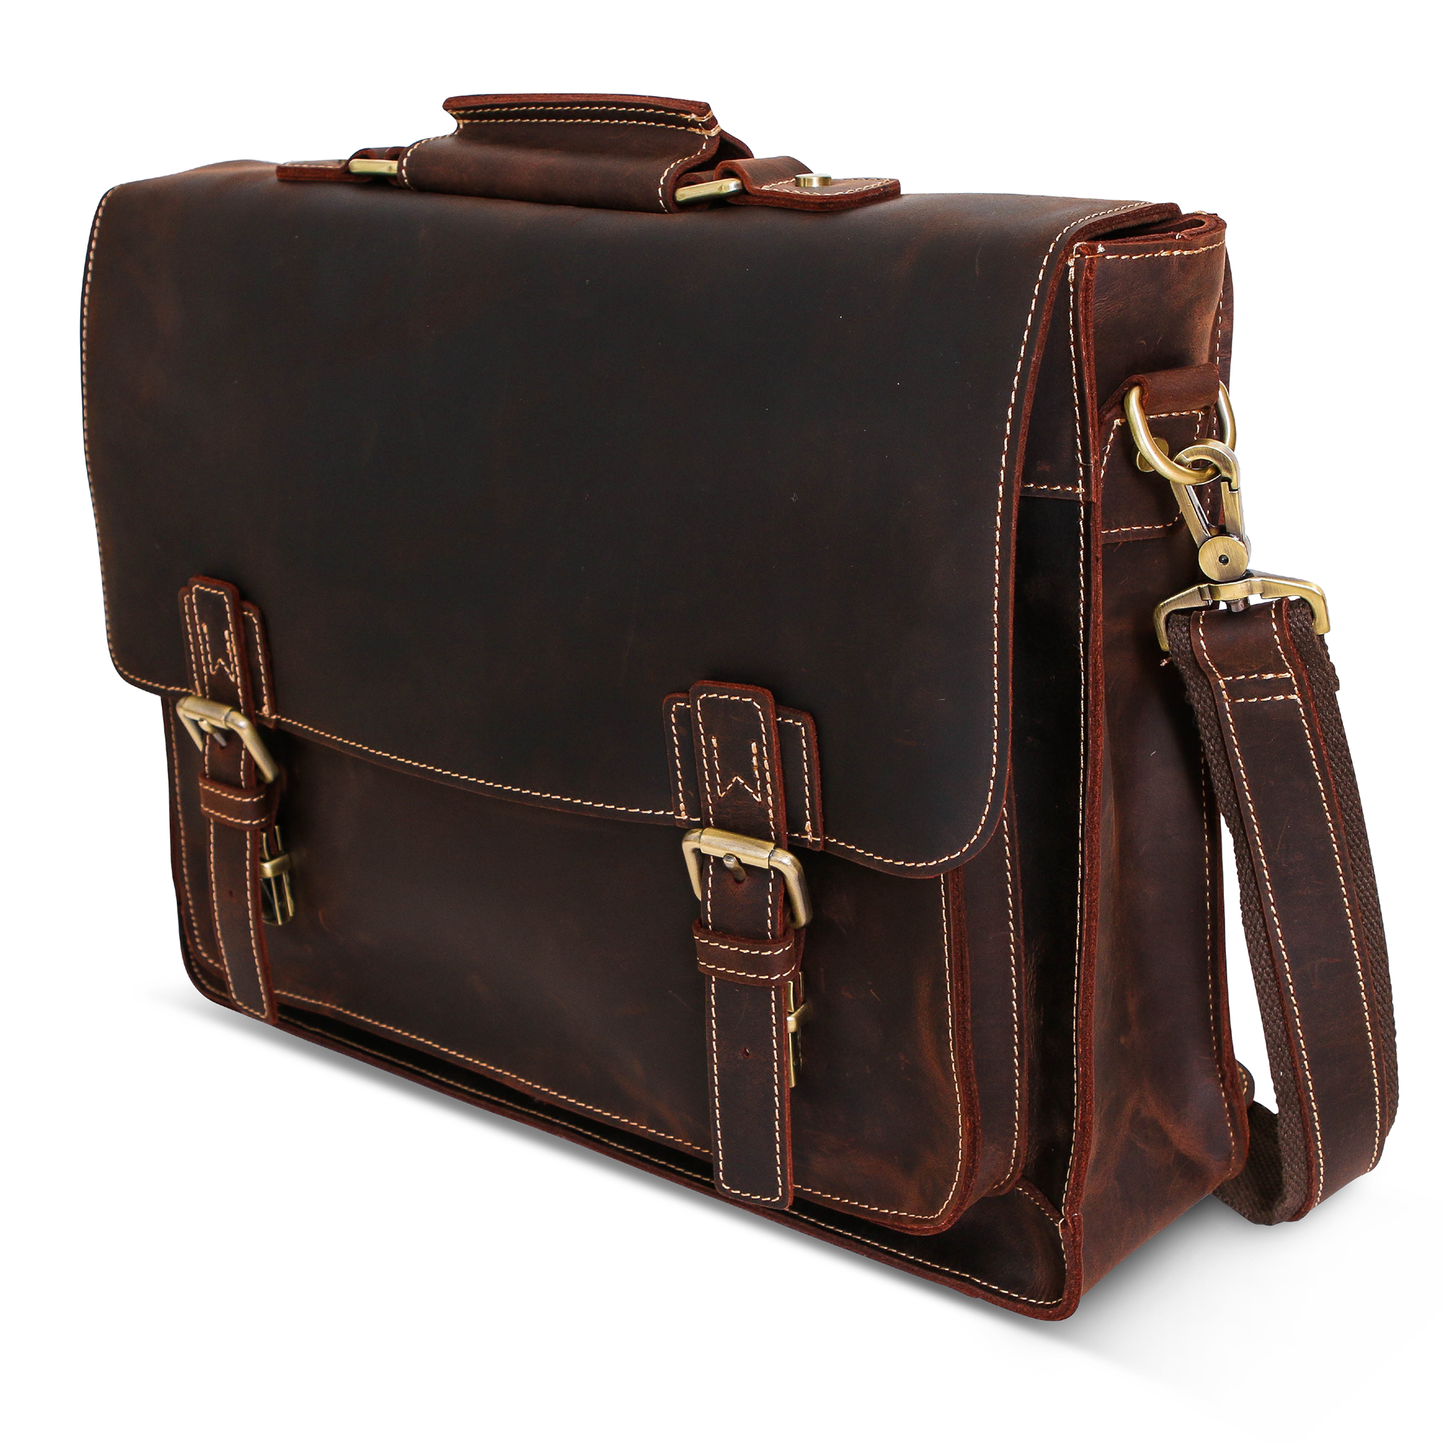 The Daily Men's Leather Messenger Bag for Laptops - Brown Briefcase